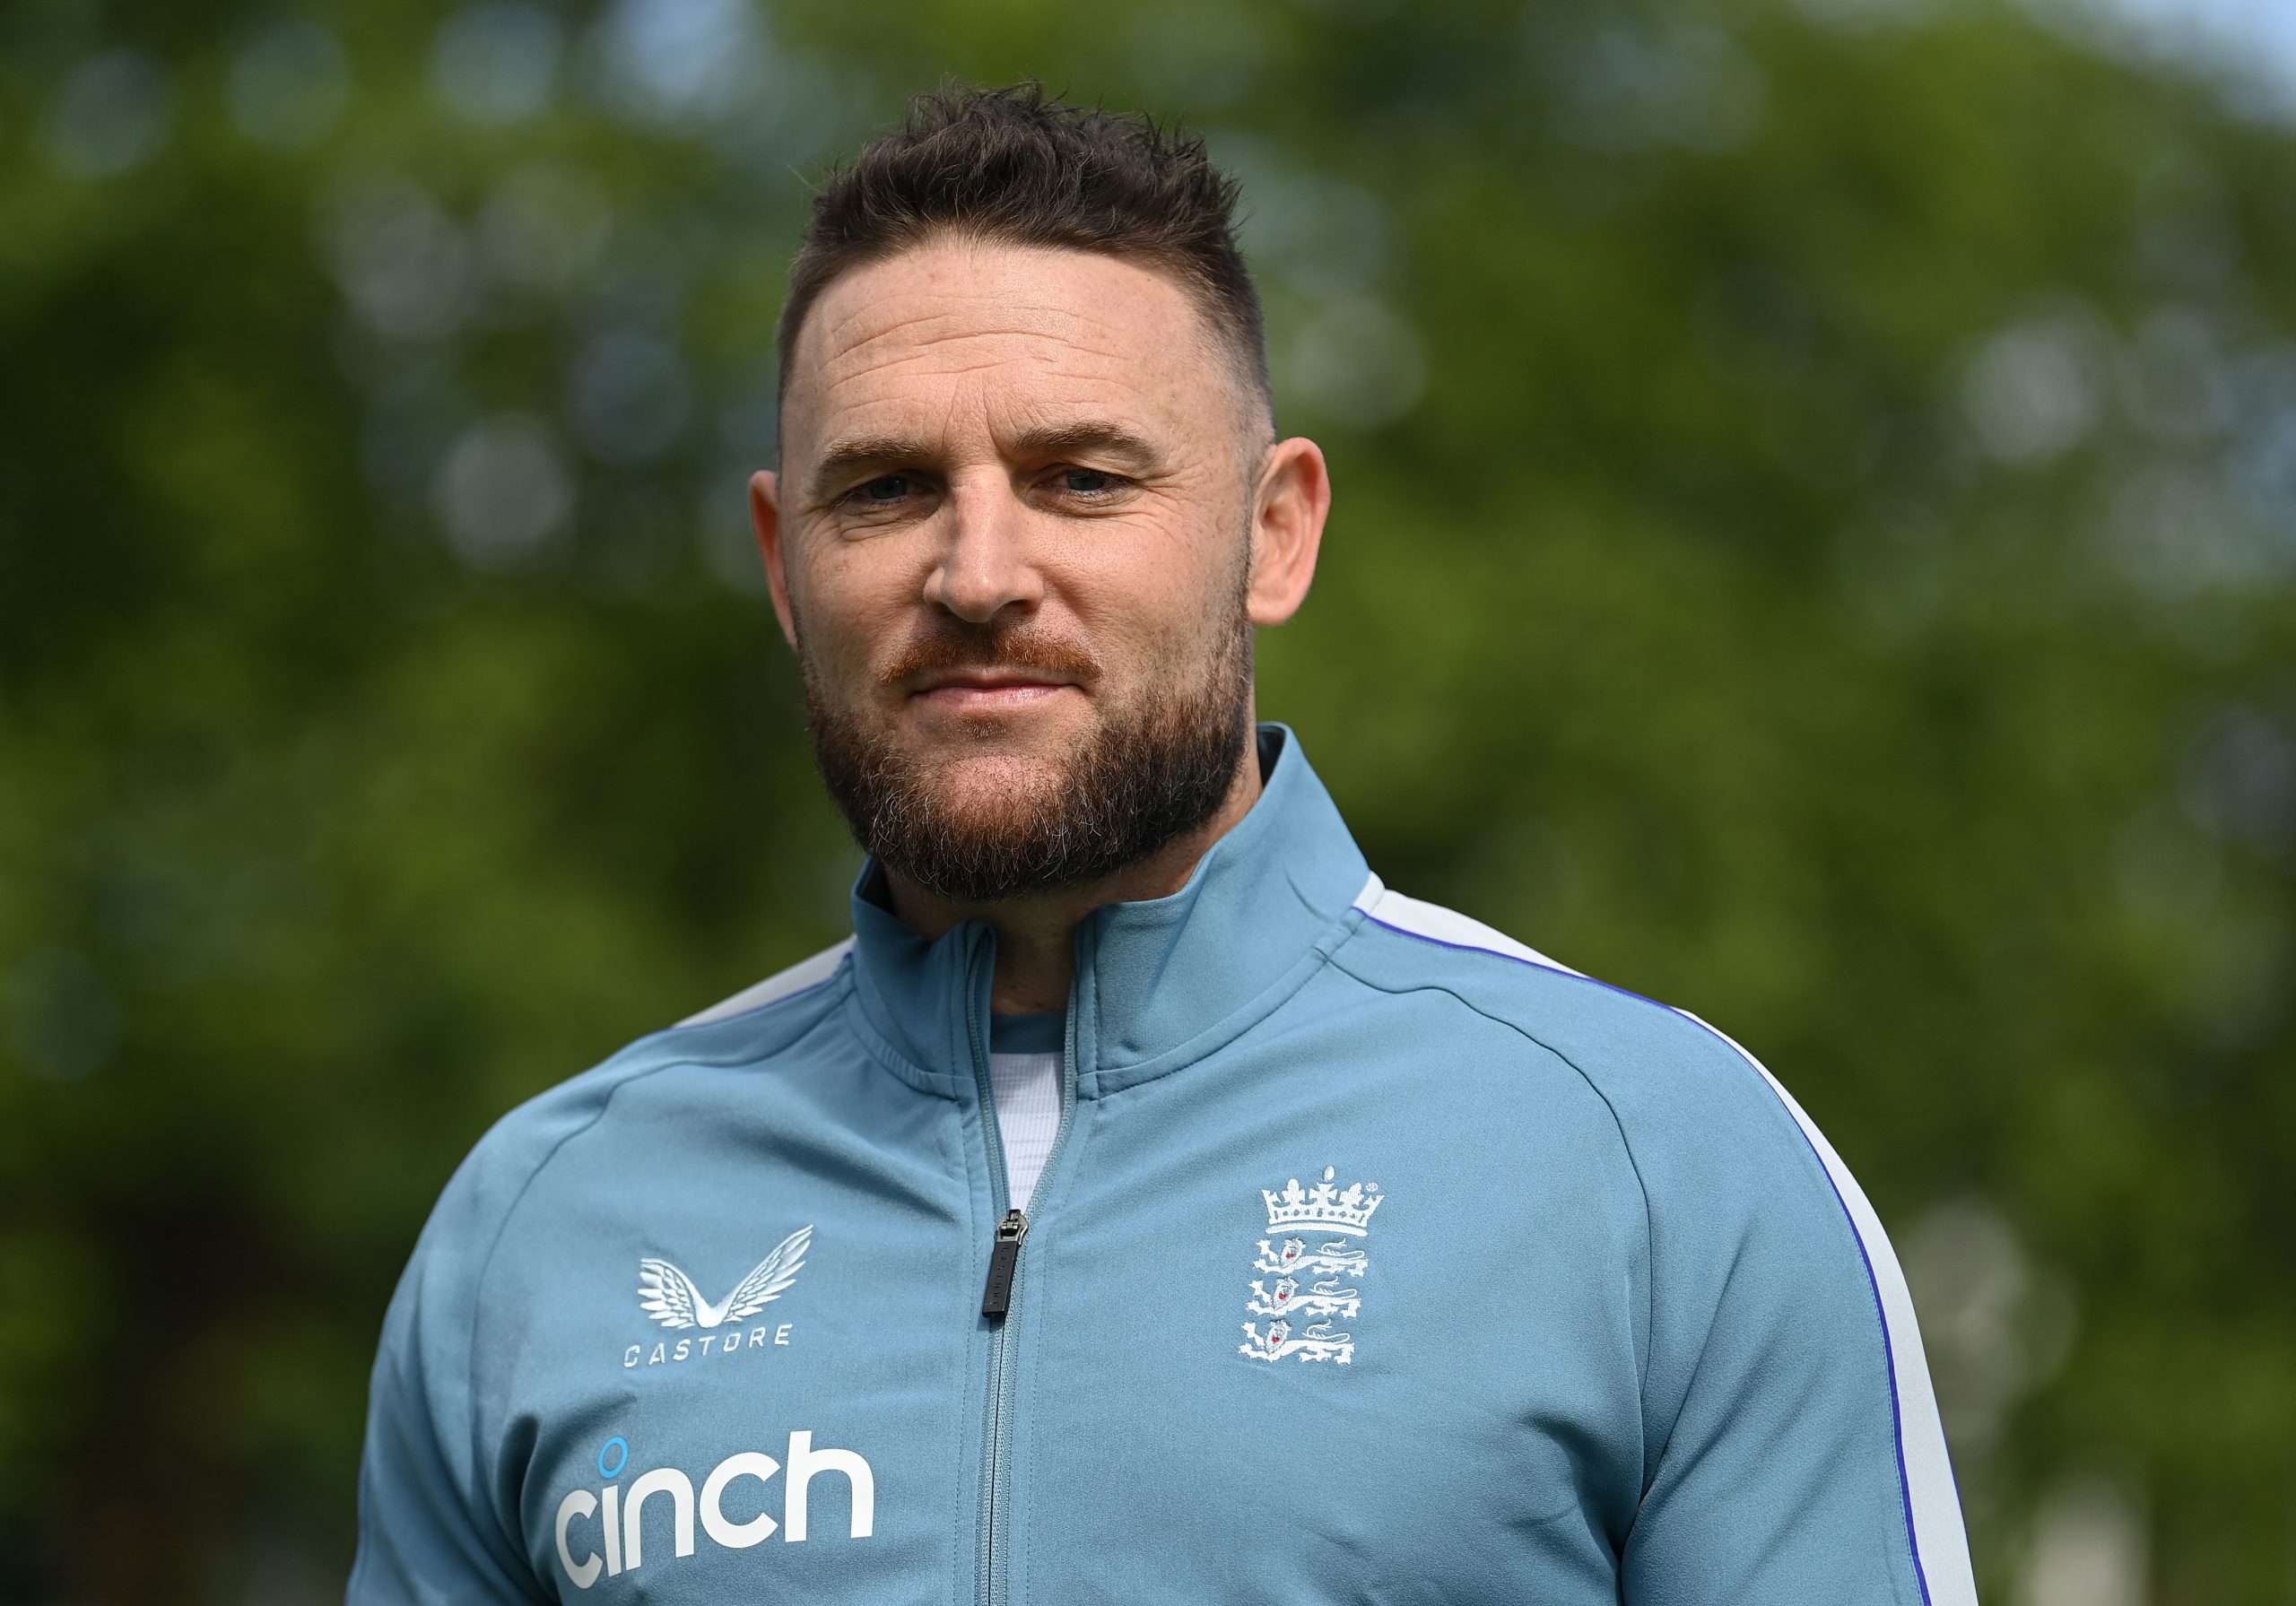 Andrew McDonald Trolled Brendon McCullum And Reminded Him Of “No Beer” Remark 